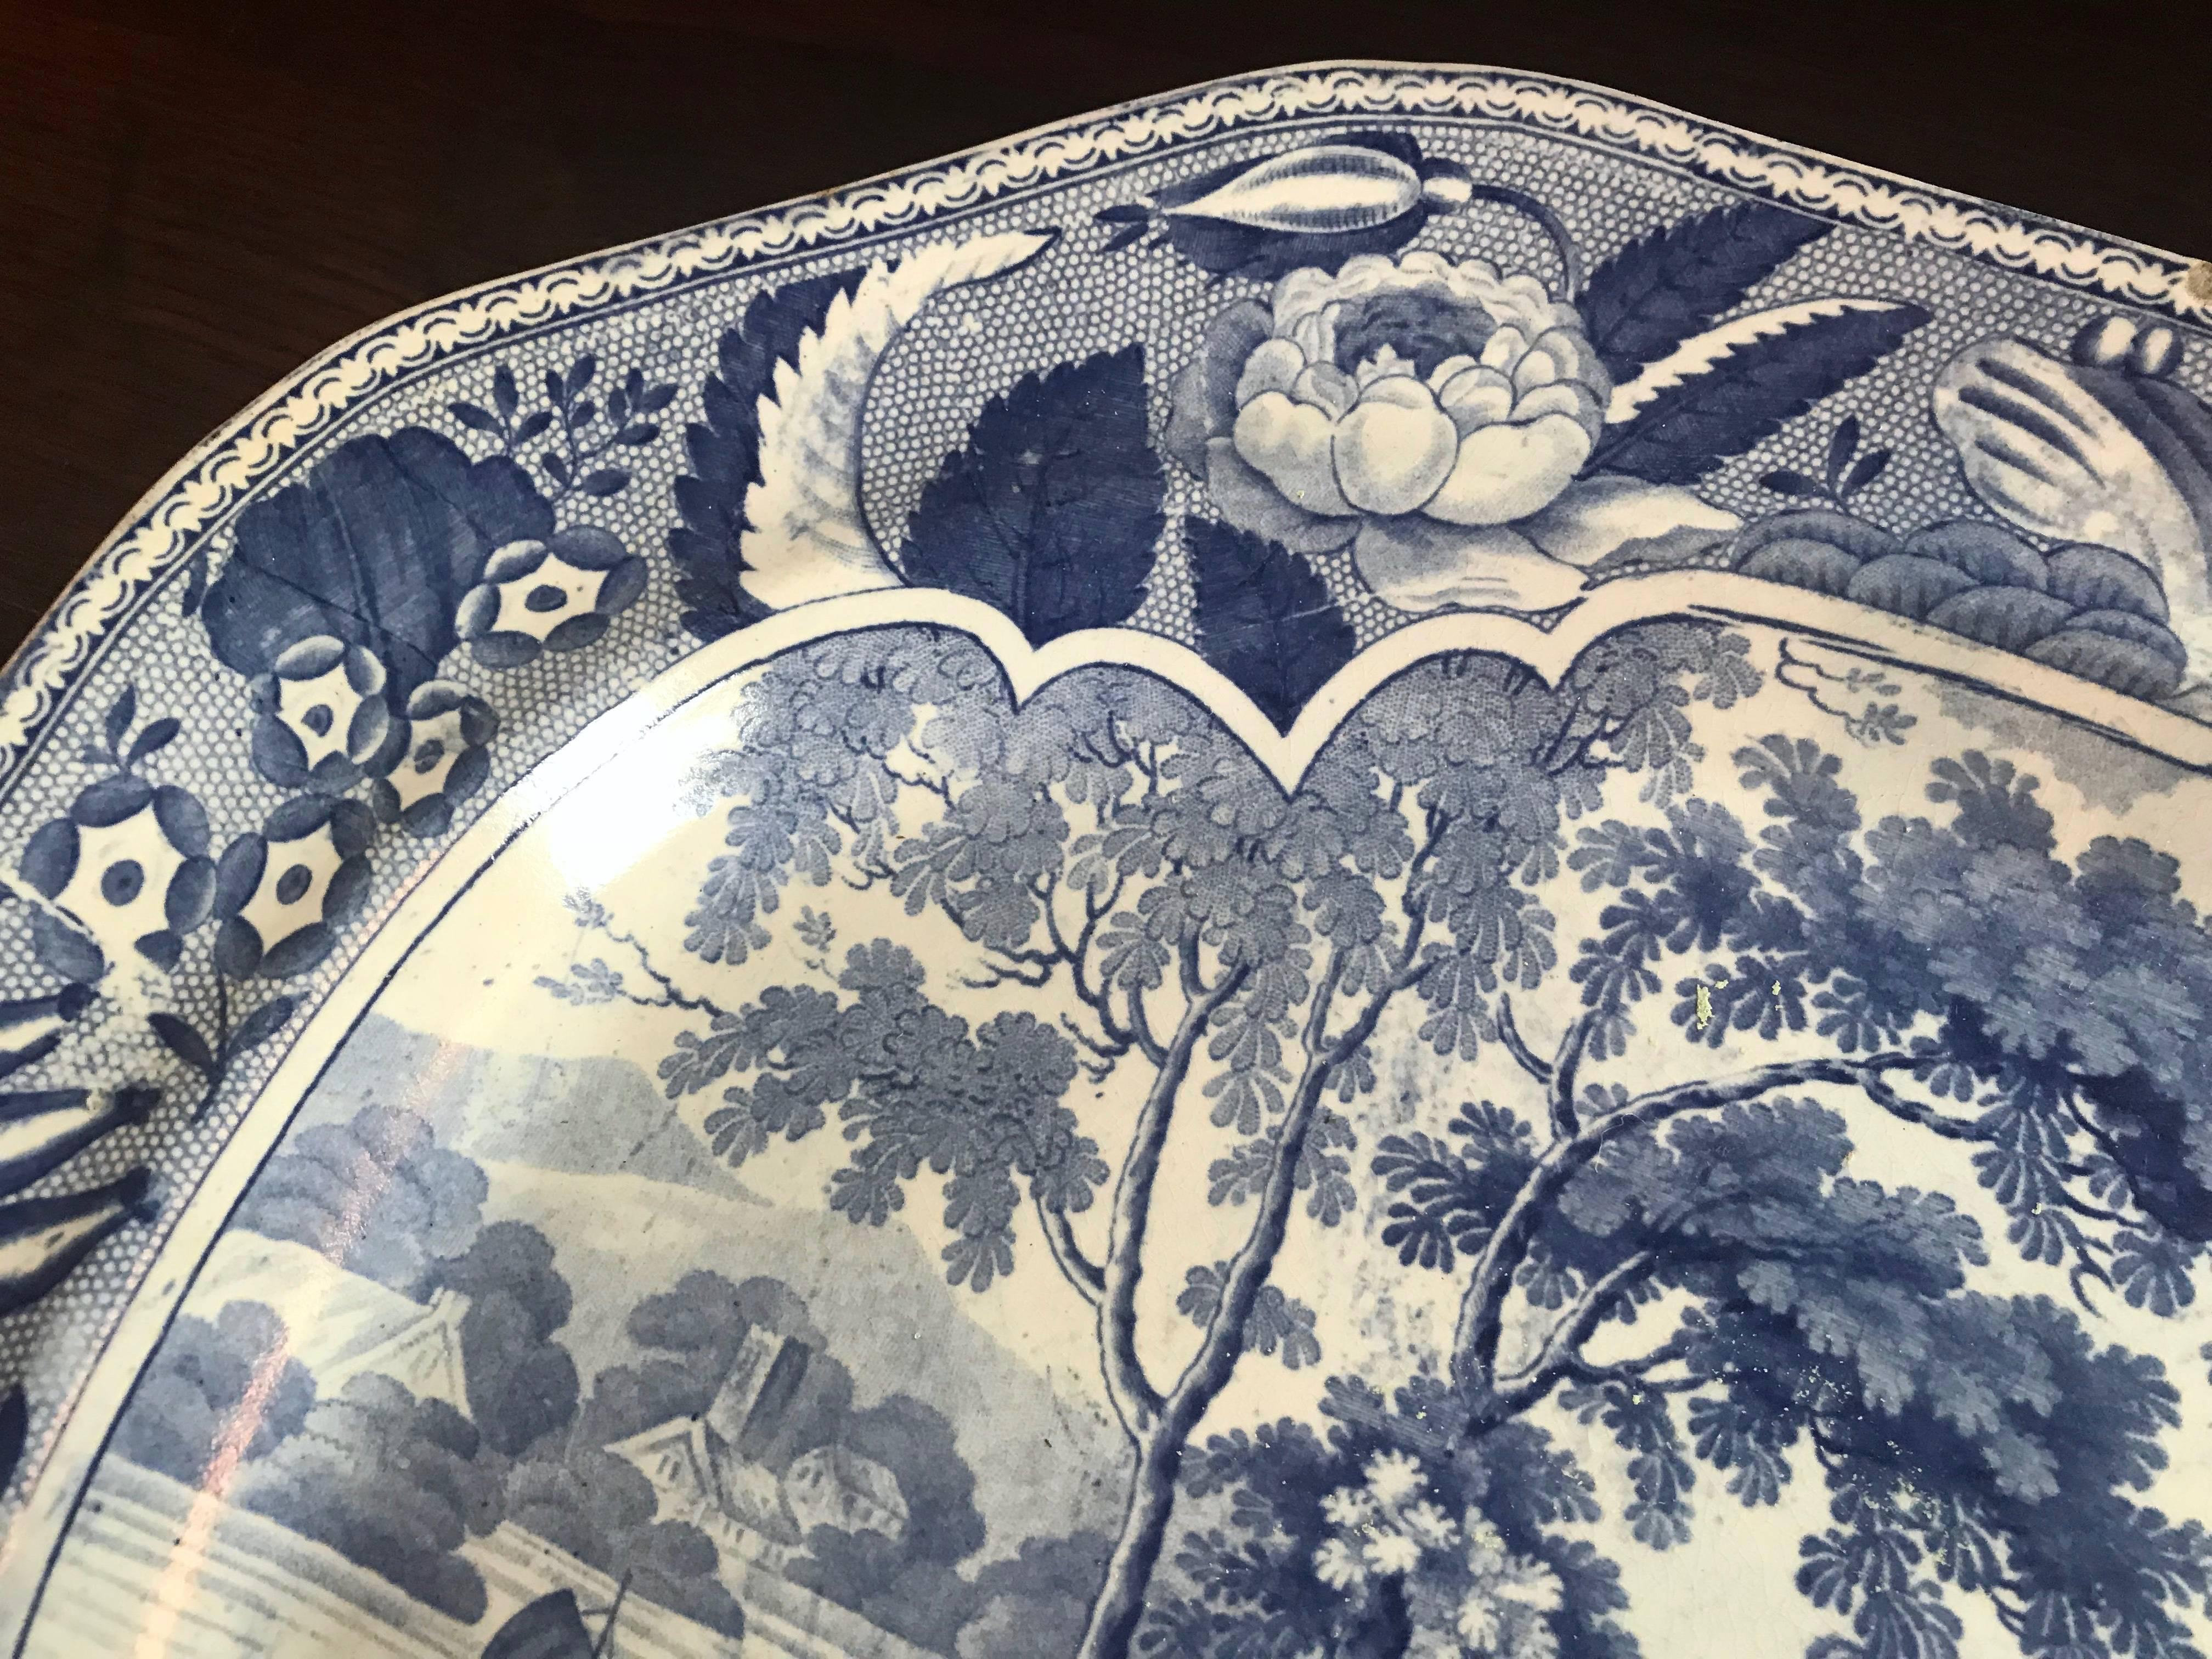 19th Century English Blue and White Transferware Platter In Excellent Condition For Sale In Birmingham, AL